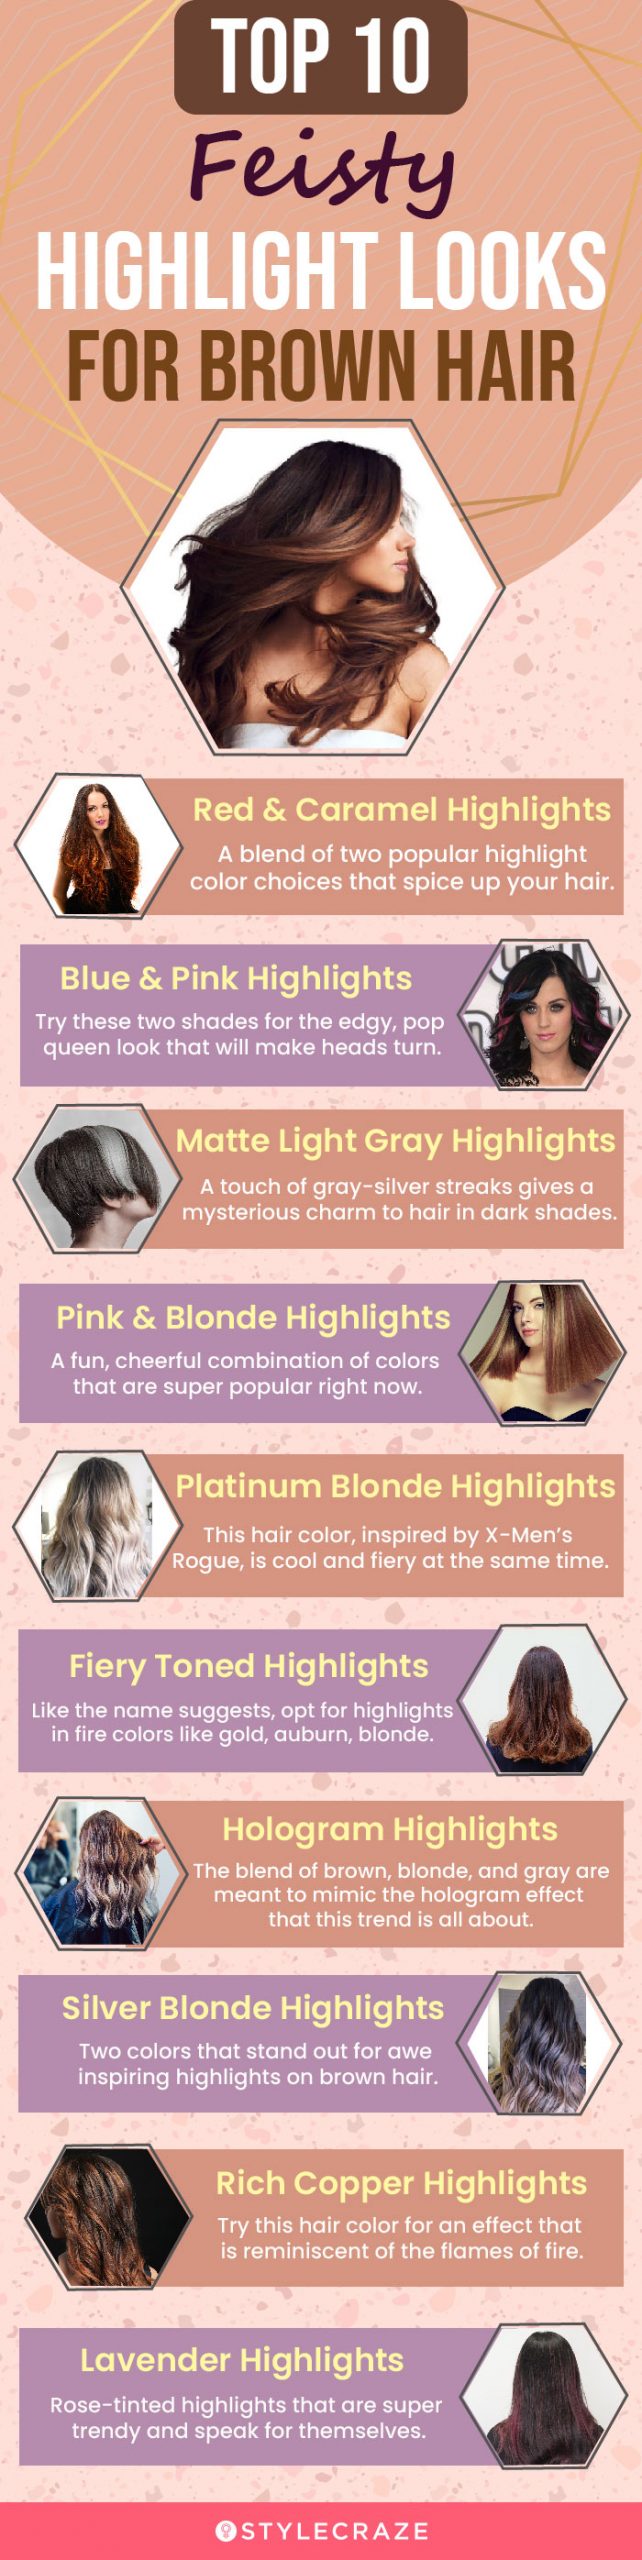 top 10 feisty highlight looks for brown hair (infographic)